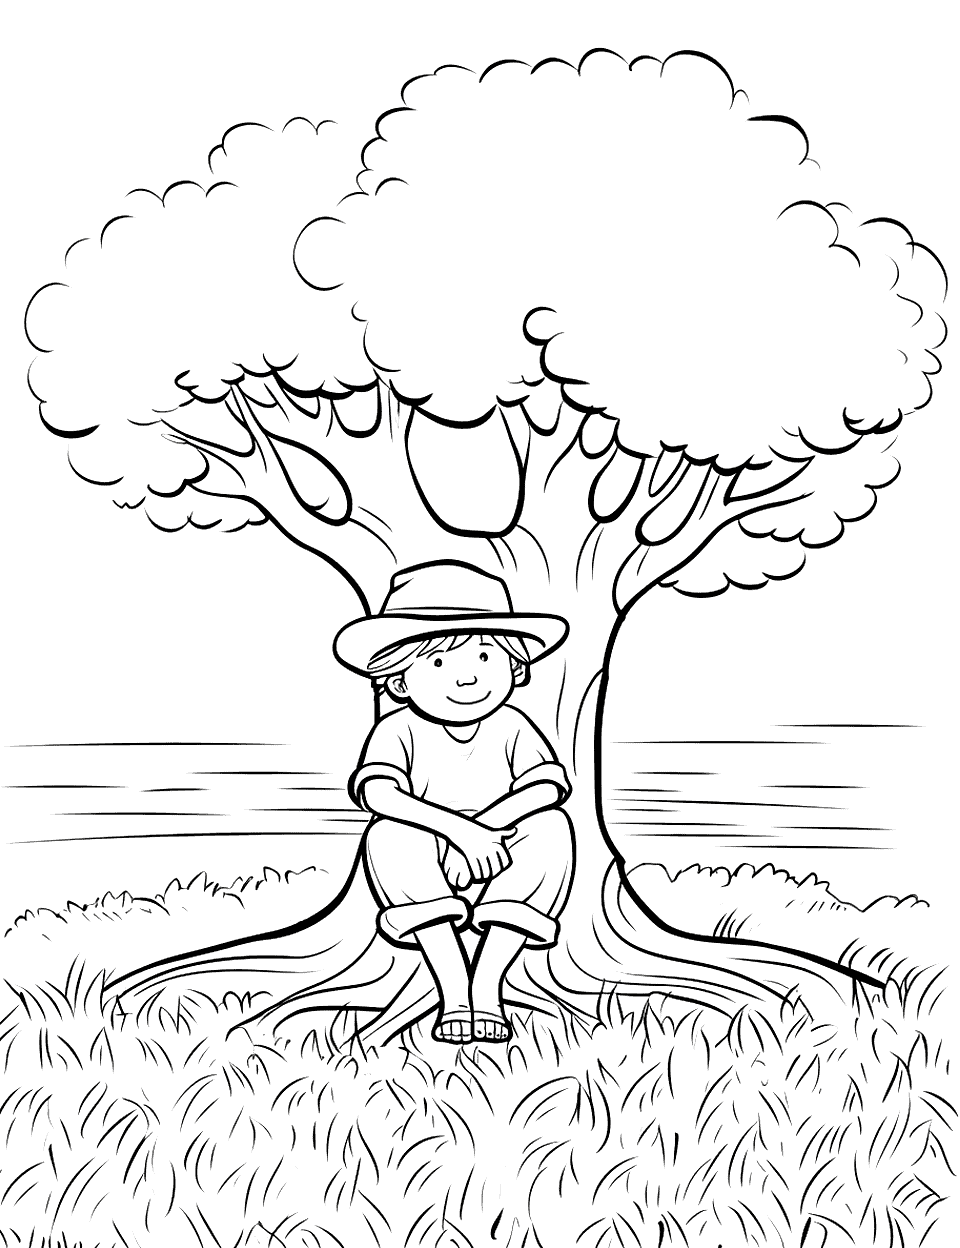 Resting Under a Tree Farm Coloring Page - A farmer resting under a tree with a hat on the head.